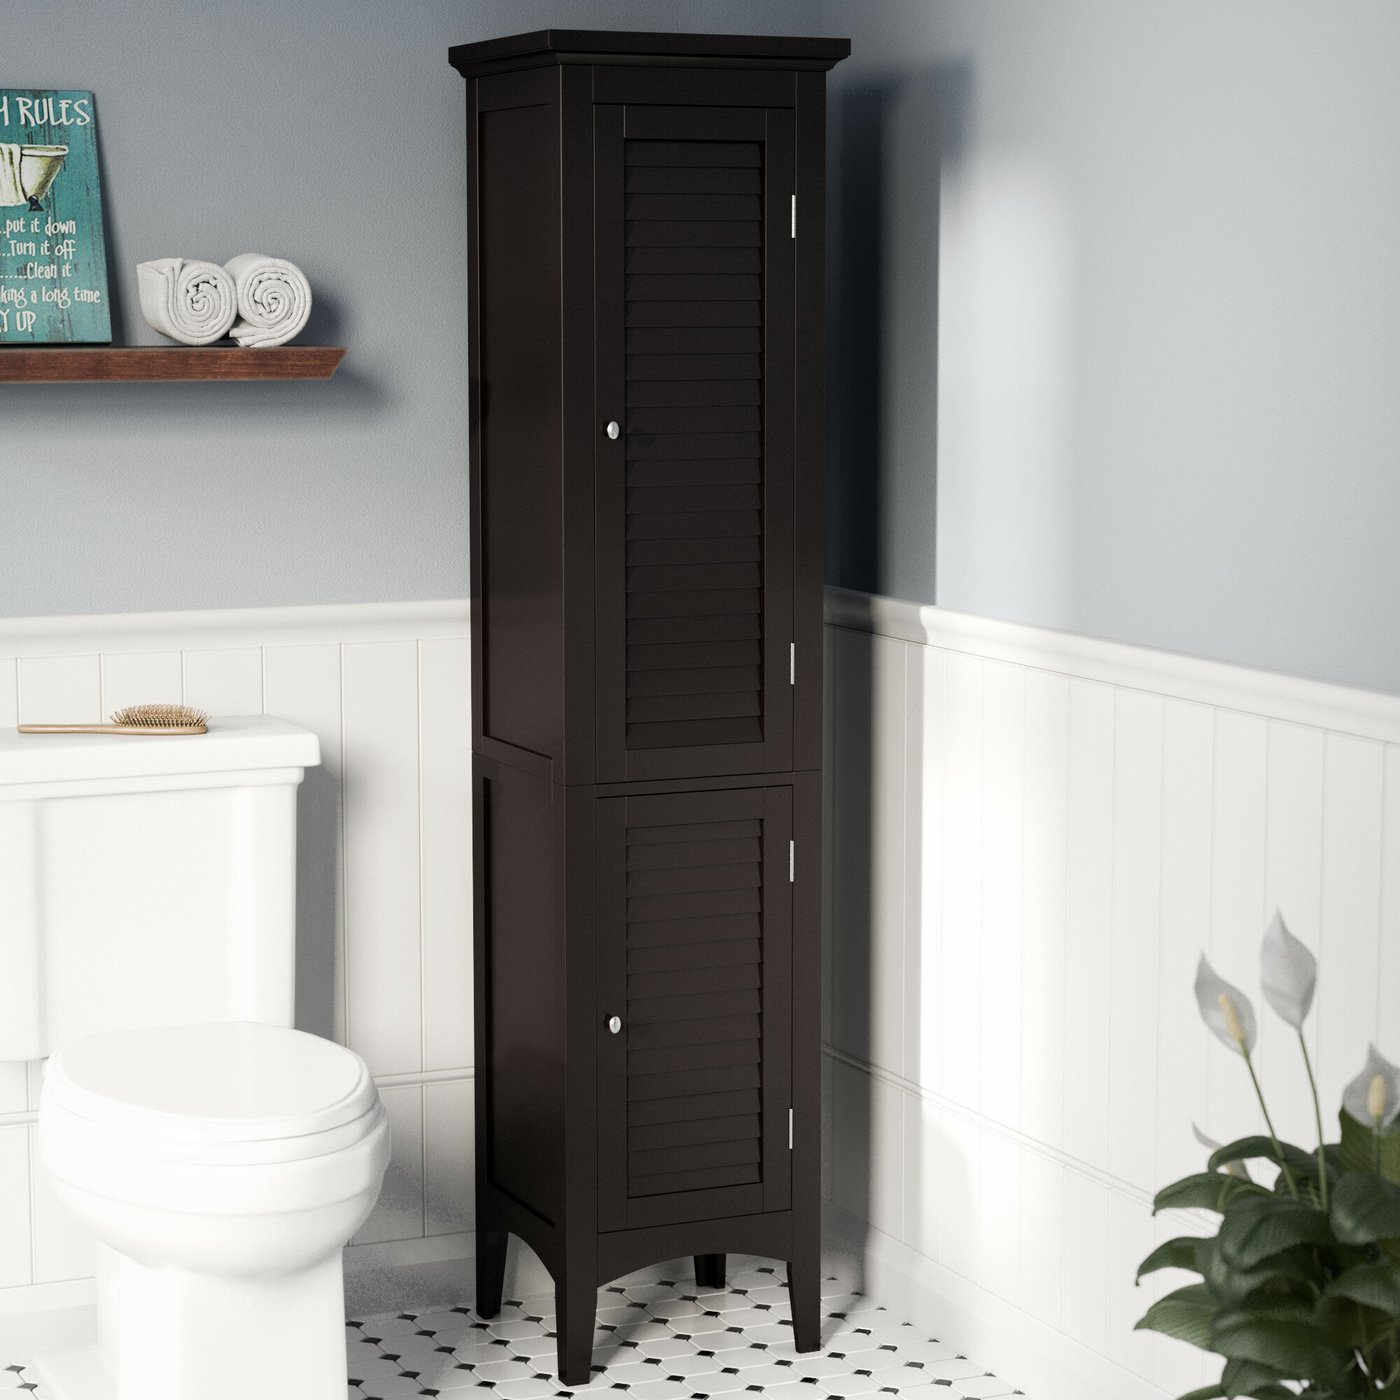 4 Expert Tips To Choose Bathroom Cabinets And Shelving - VisualHunt